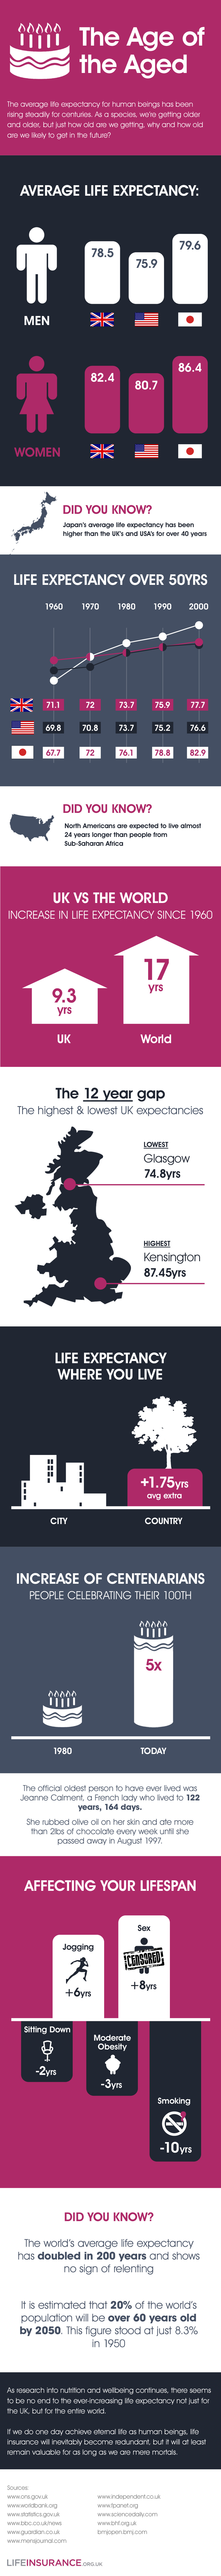 Life Expectancy Over 50 Years